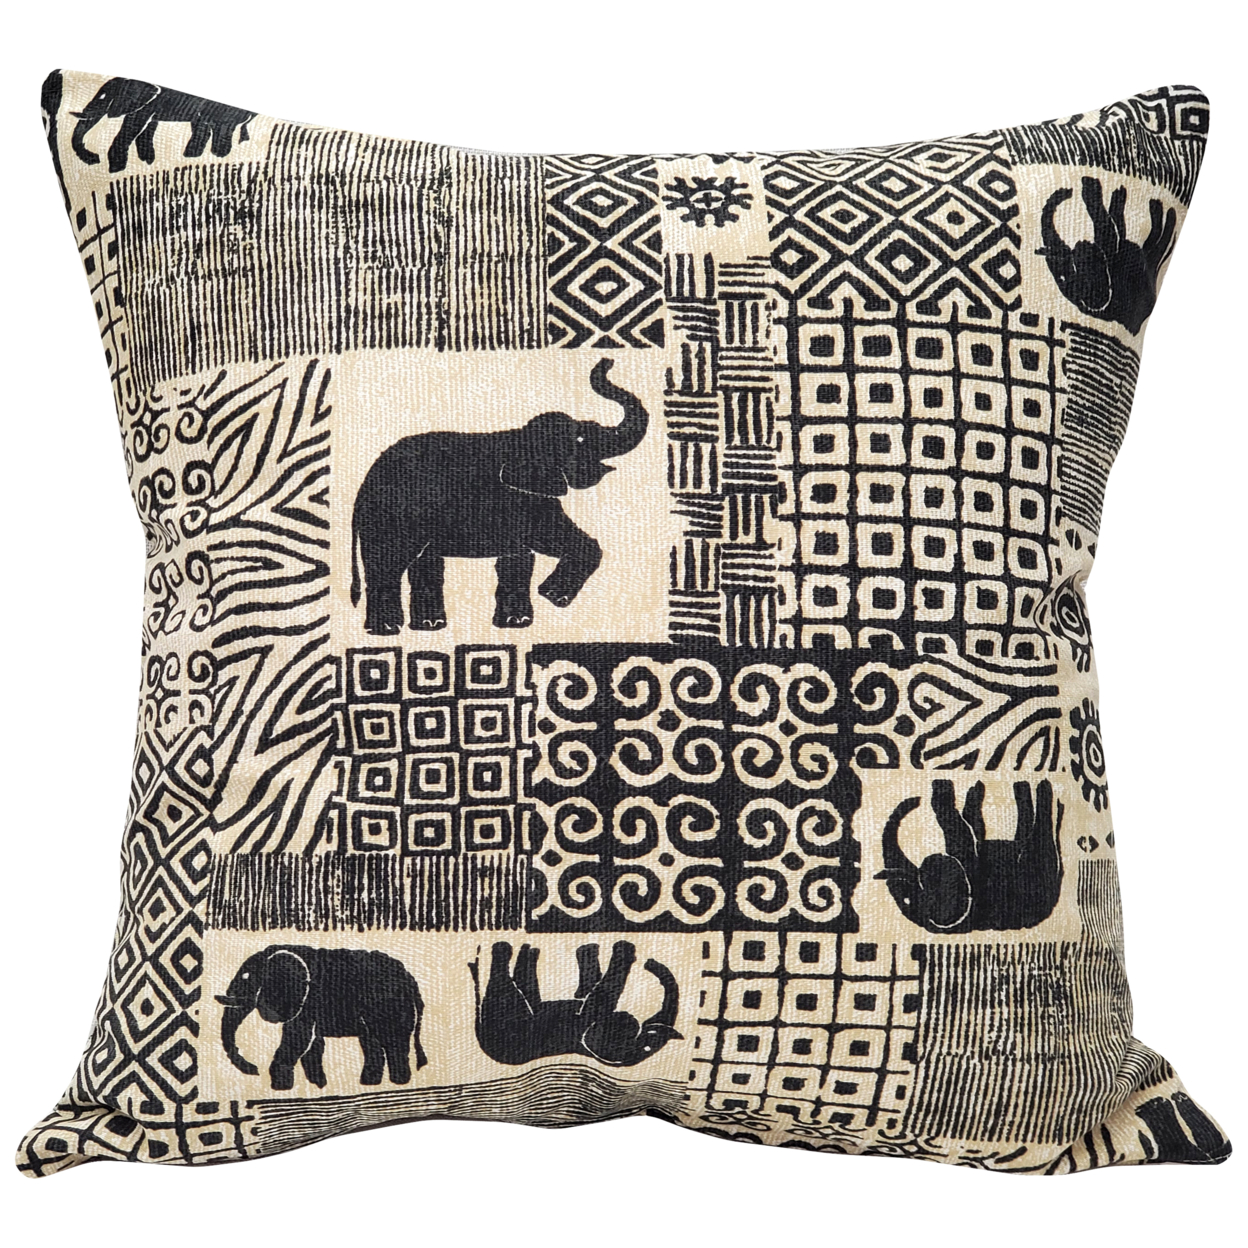 Zakouma Elephant Throw Pillow 20x20 Inches Square, Complete Pillow With Polyfill Pillow Insert